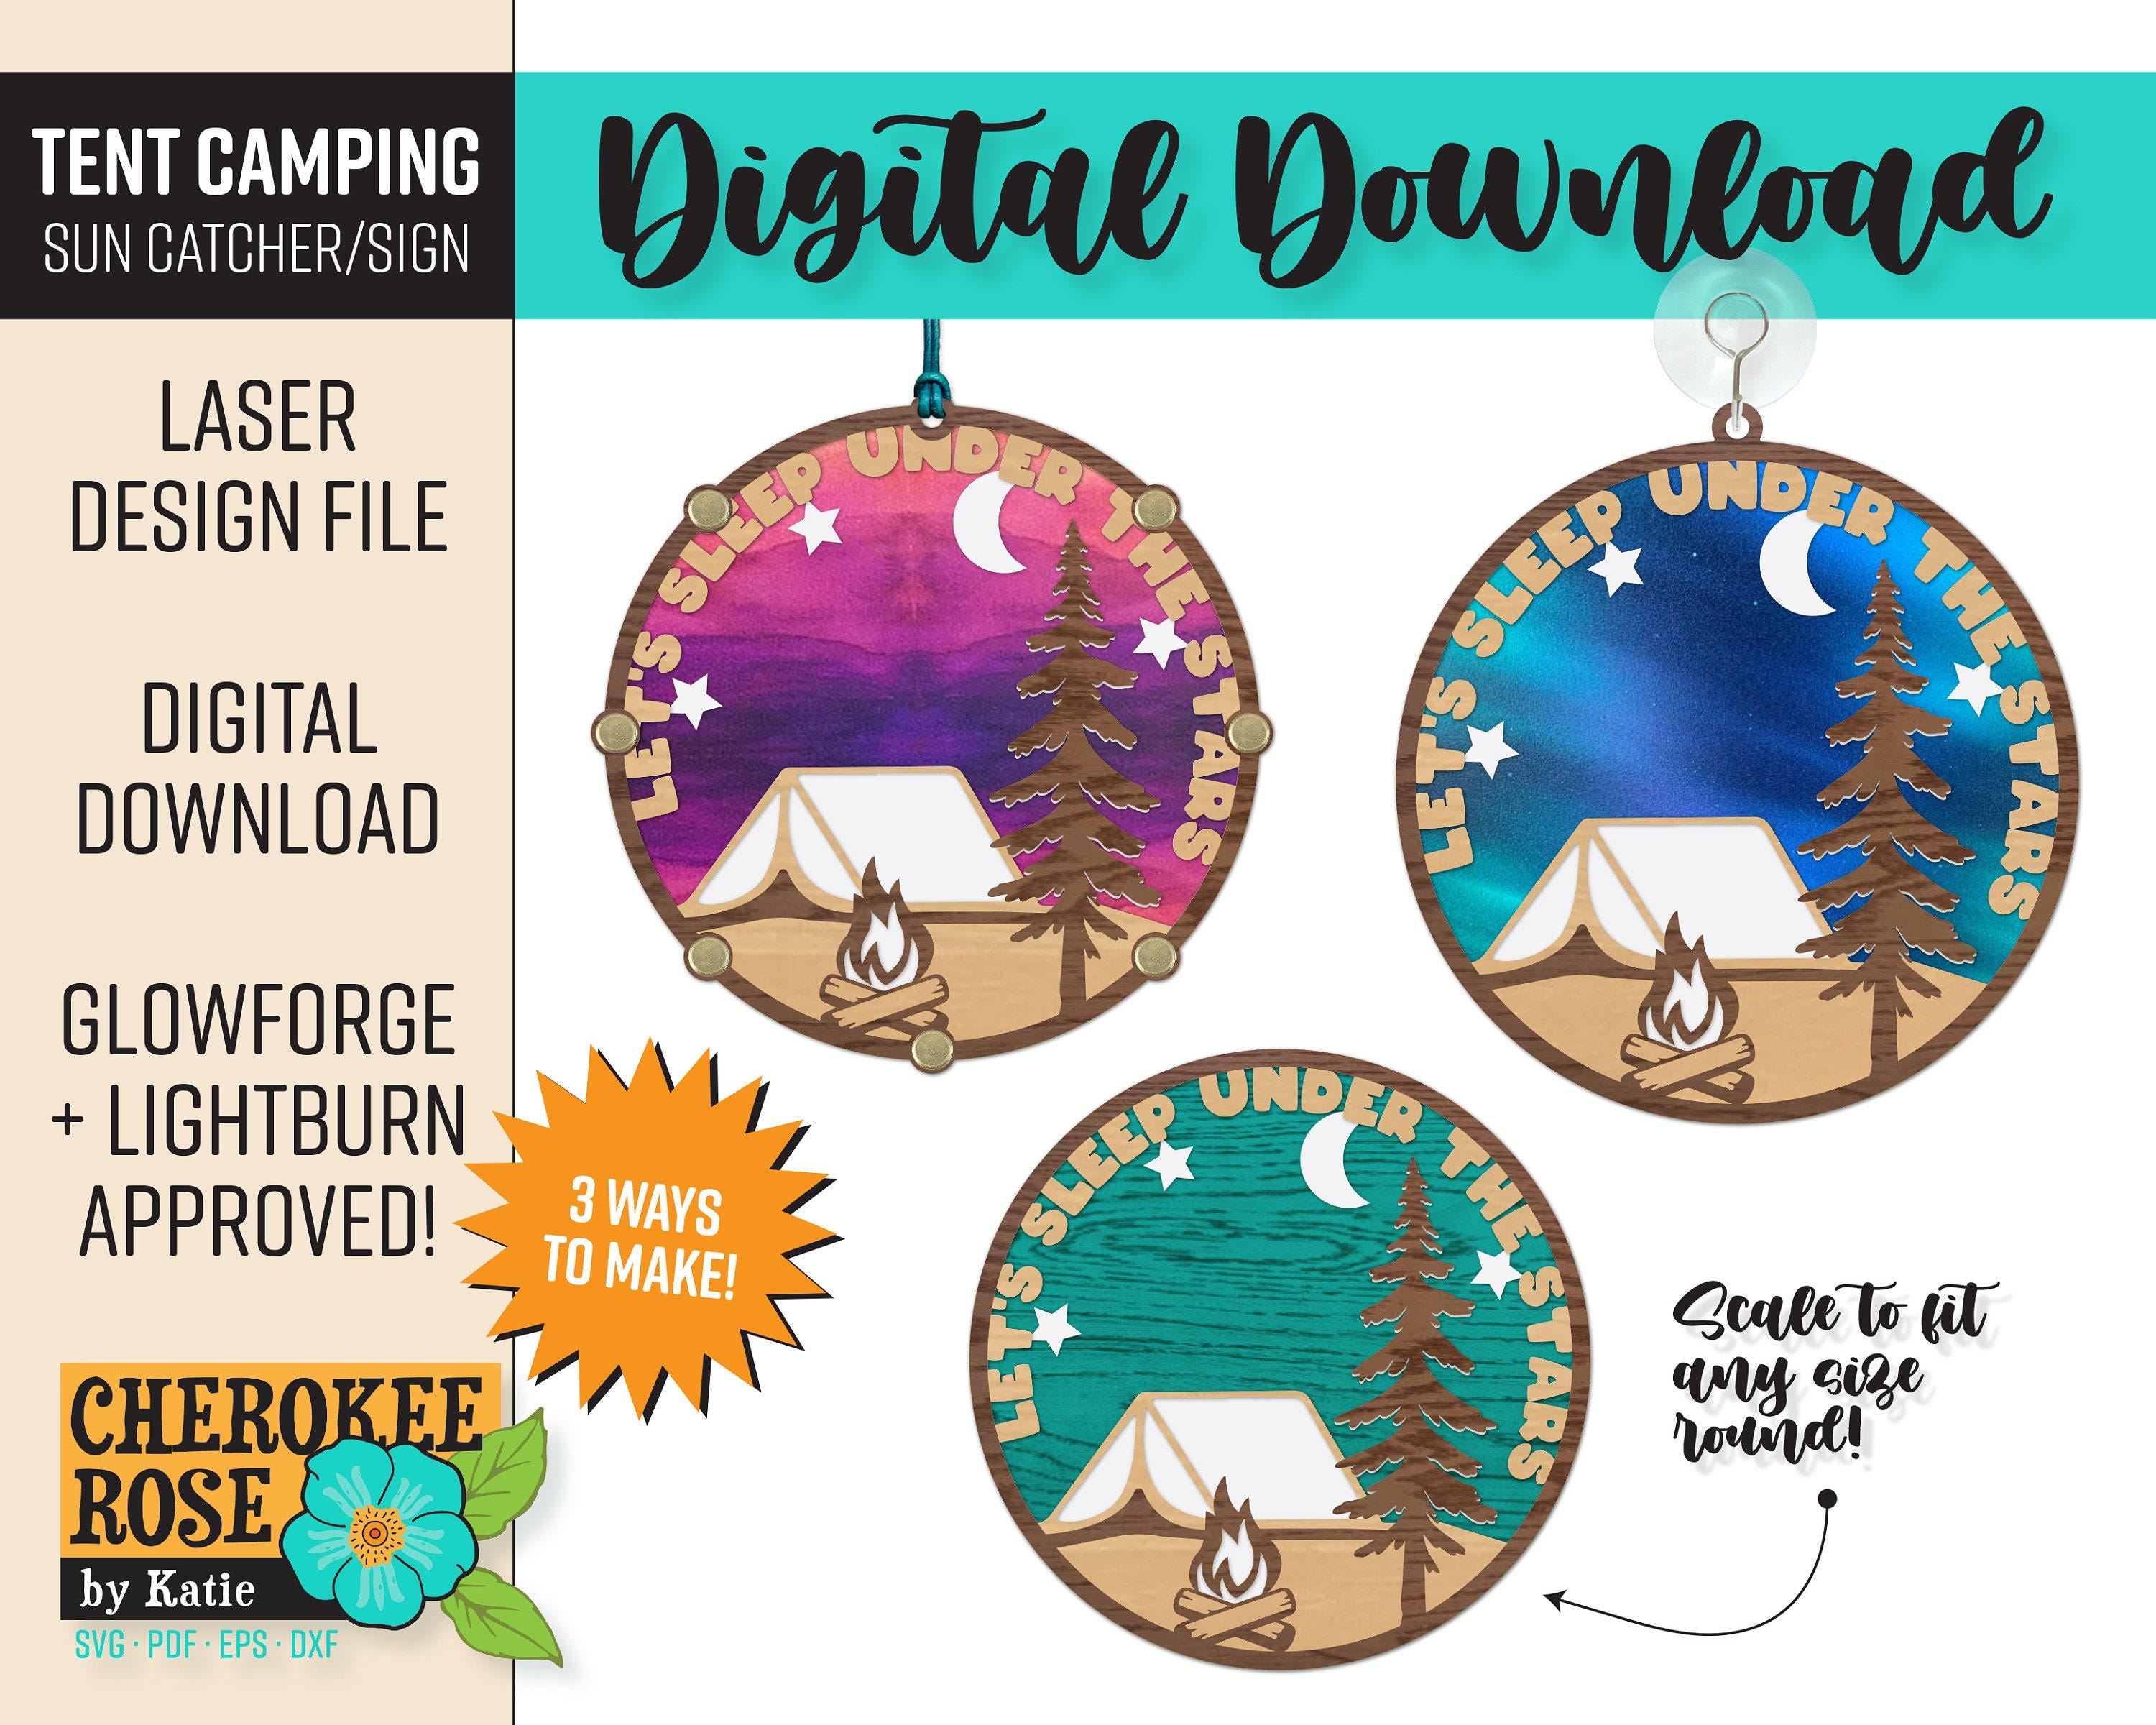 Camping Sun Catcher - Round Sign Design - Tent Camping - Sleep Under the Stars - Patternply Sun Catcher - PDF - SVG [Digital File Only]